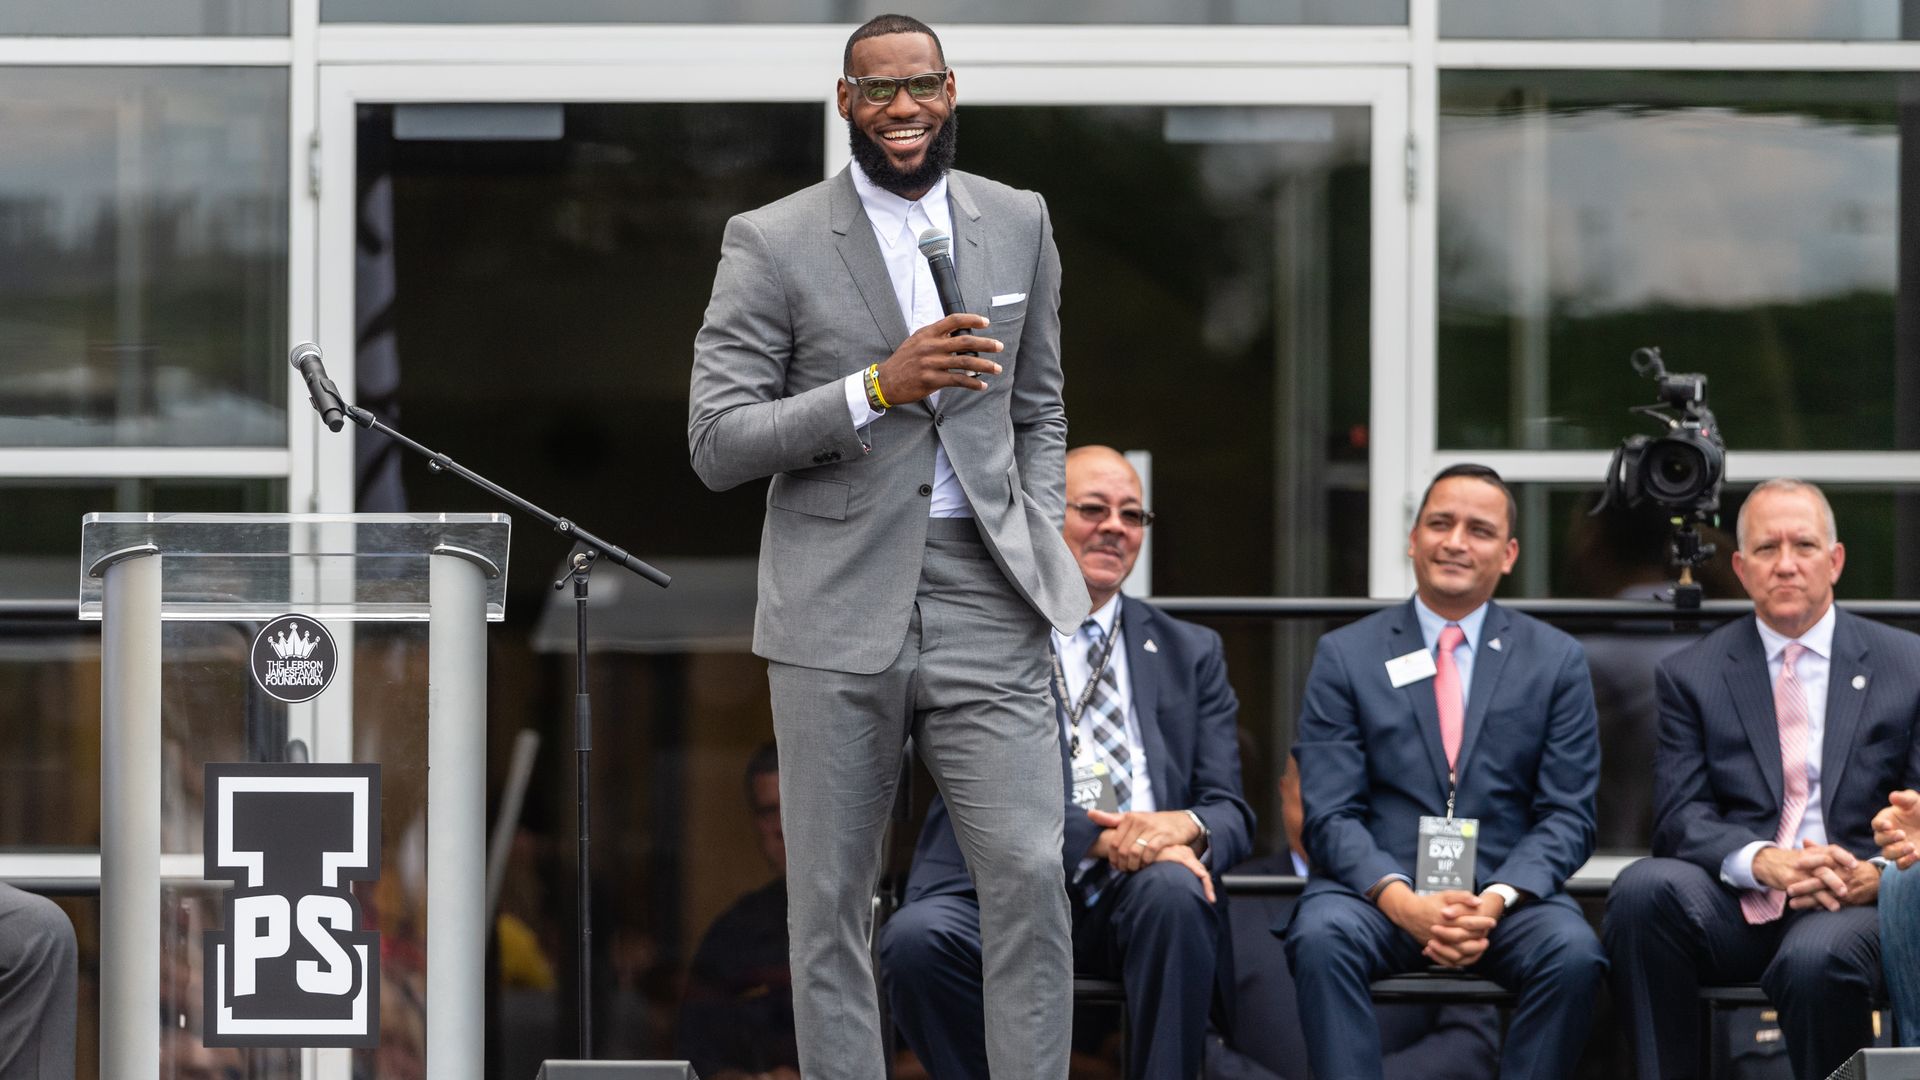 LeBron James smiling, speaking to a crowd.